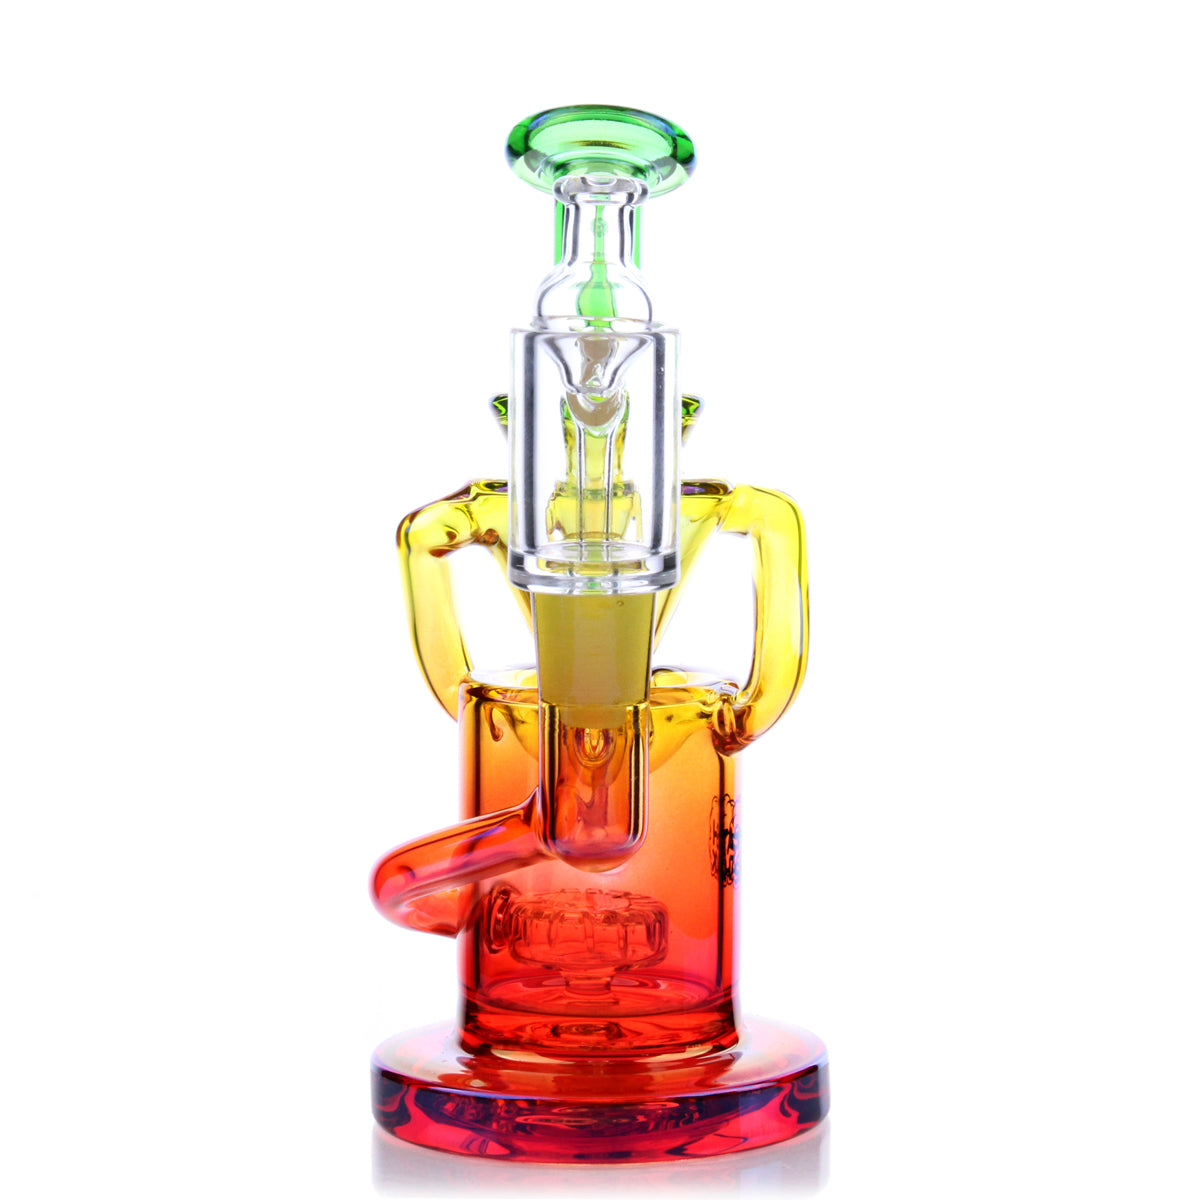 Desert Rose Mini Rig in vibrant rainbow colors with a showerhead percolator, side view on white background